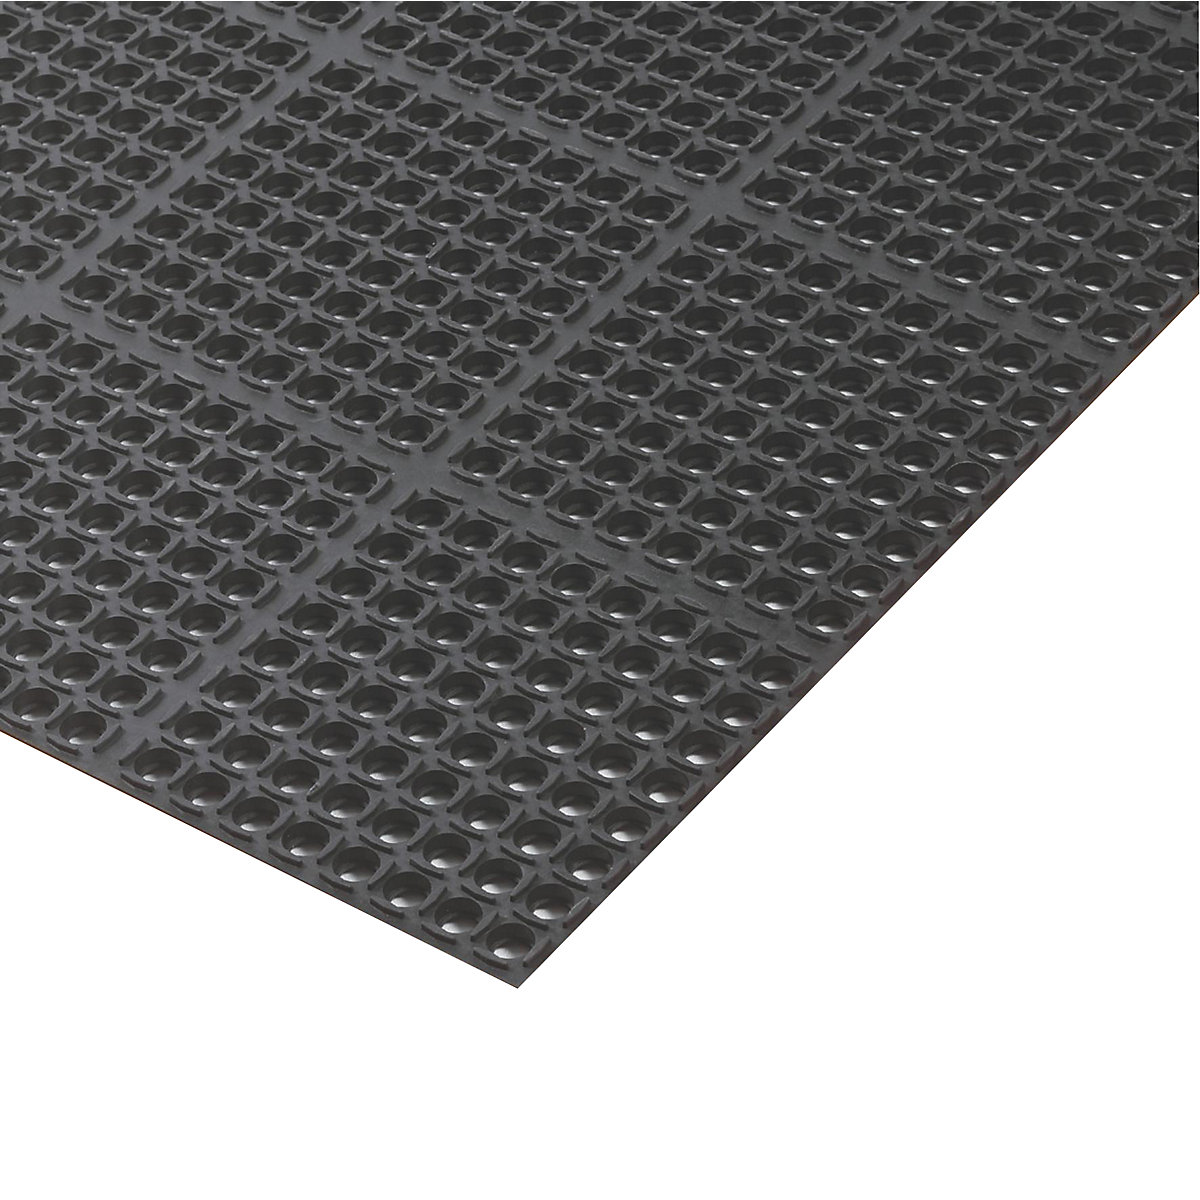 Safety Stance anti-fatigue matting – NOTRAX, perforated, LxW 3150 x 970 mm-6